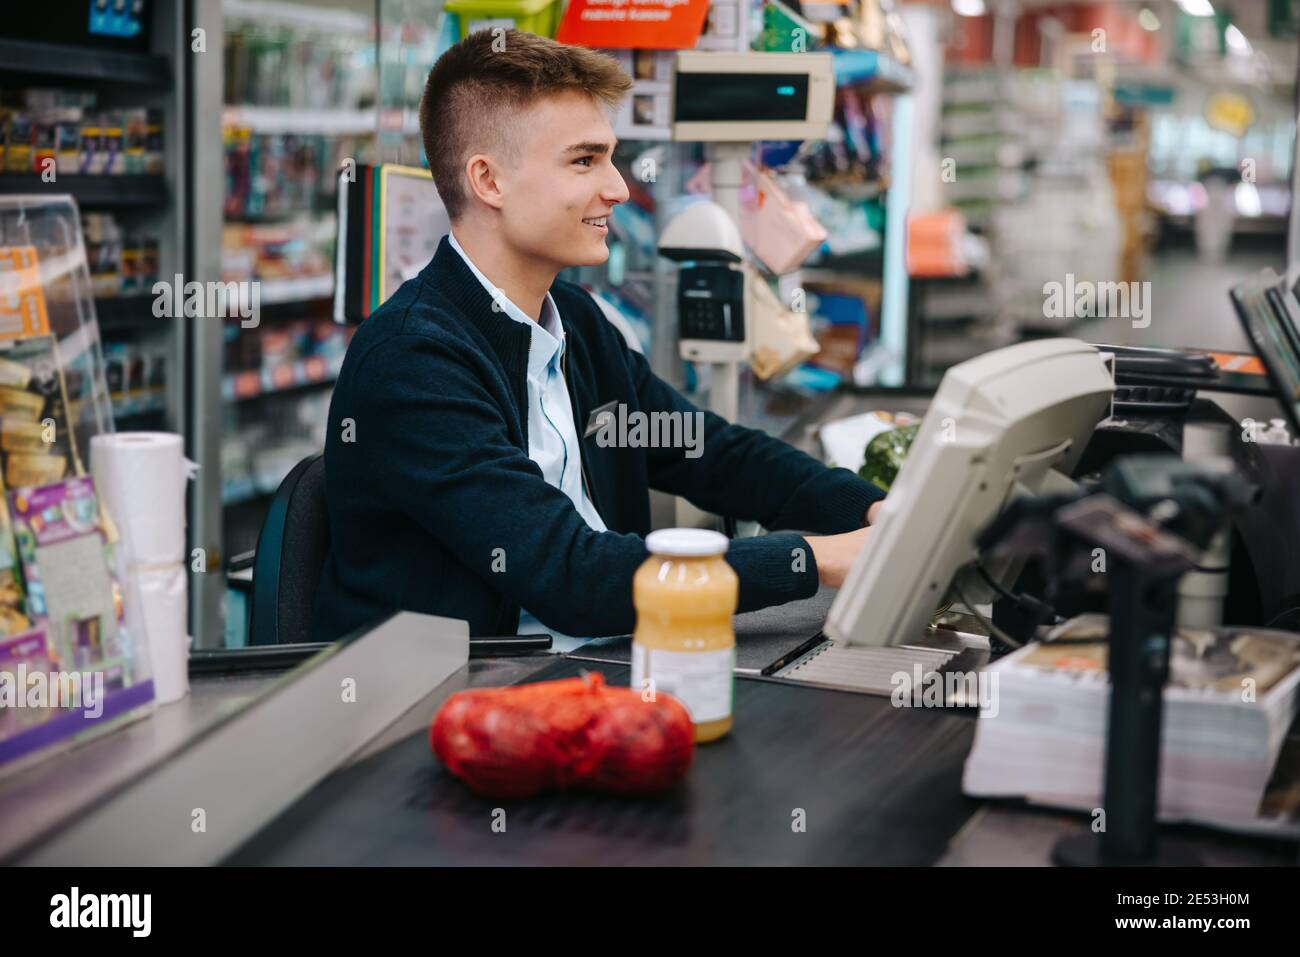 Man working at grocery store checkout. Young worker on holiday job at supermarket. Stock Photo